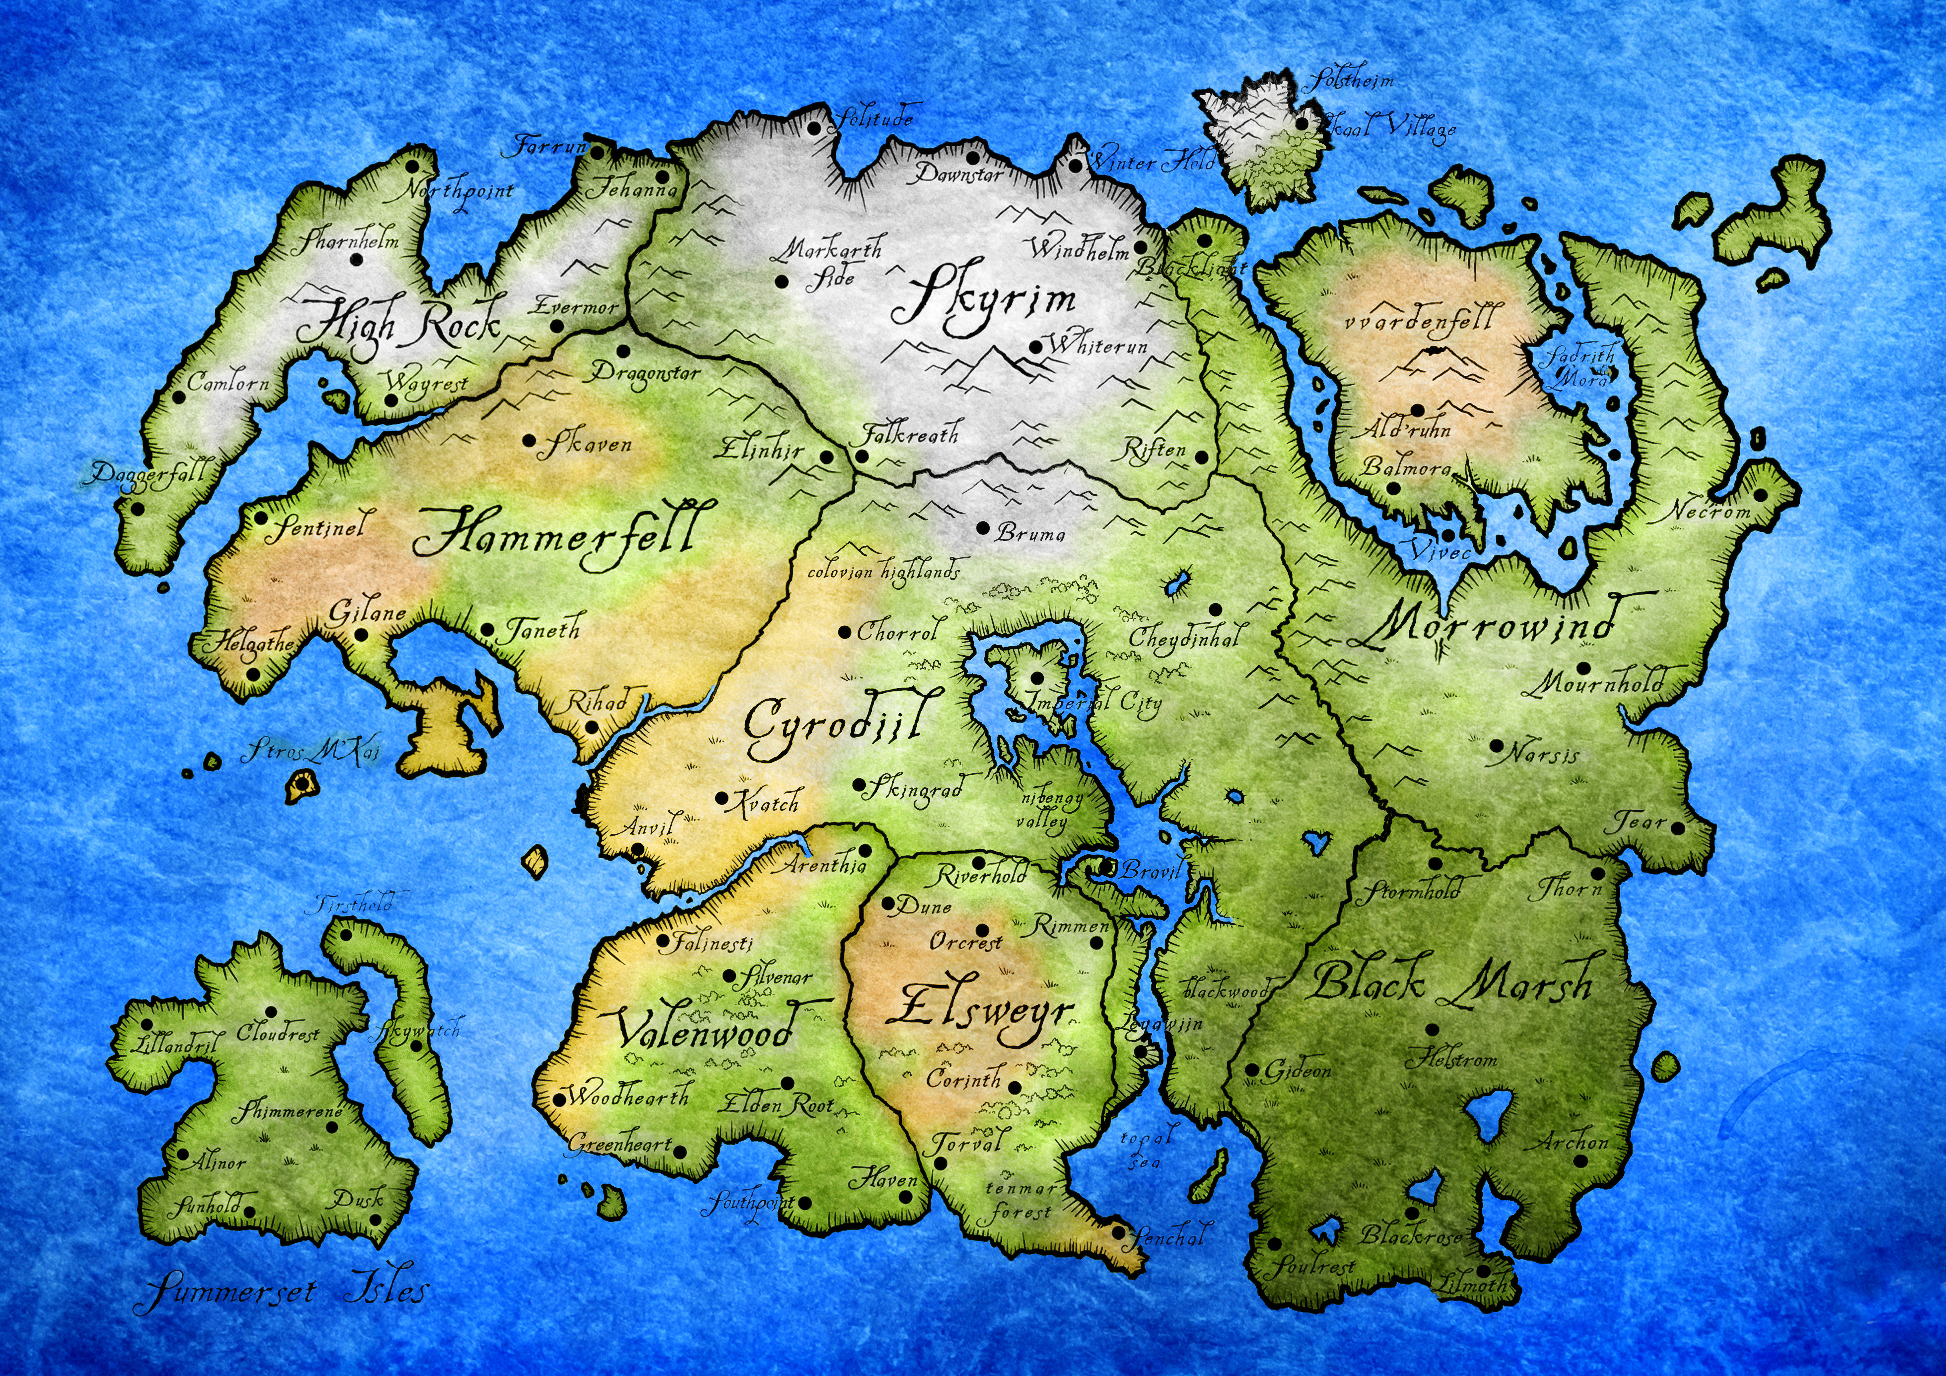 all location the elder scrolls games have taken place